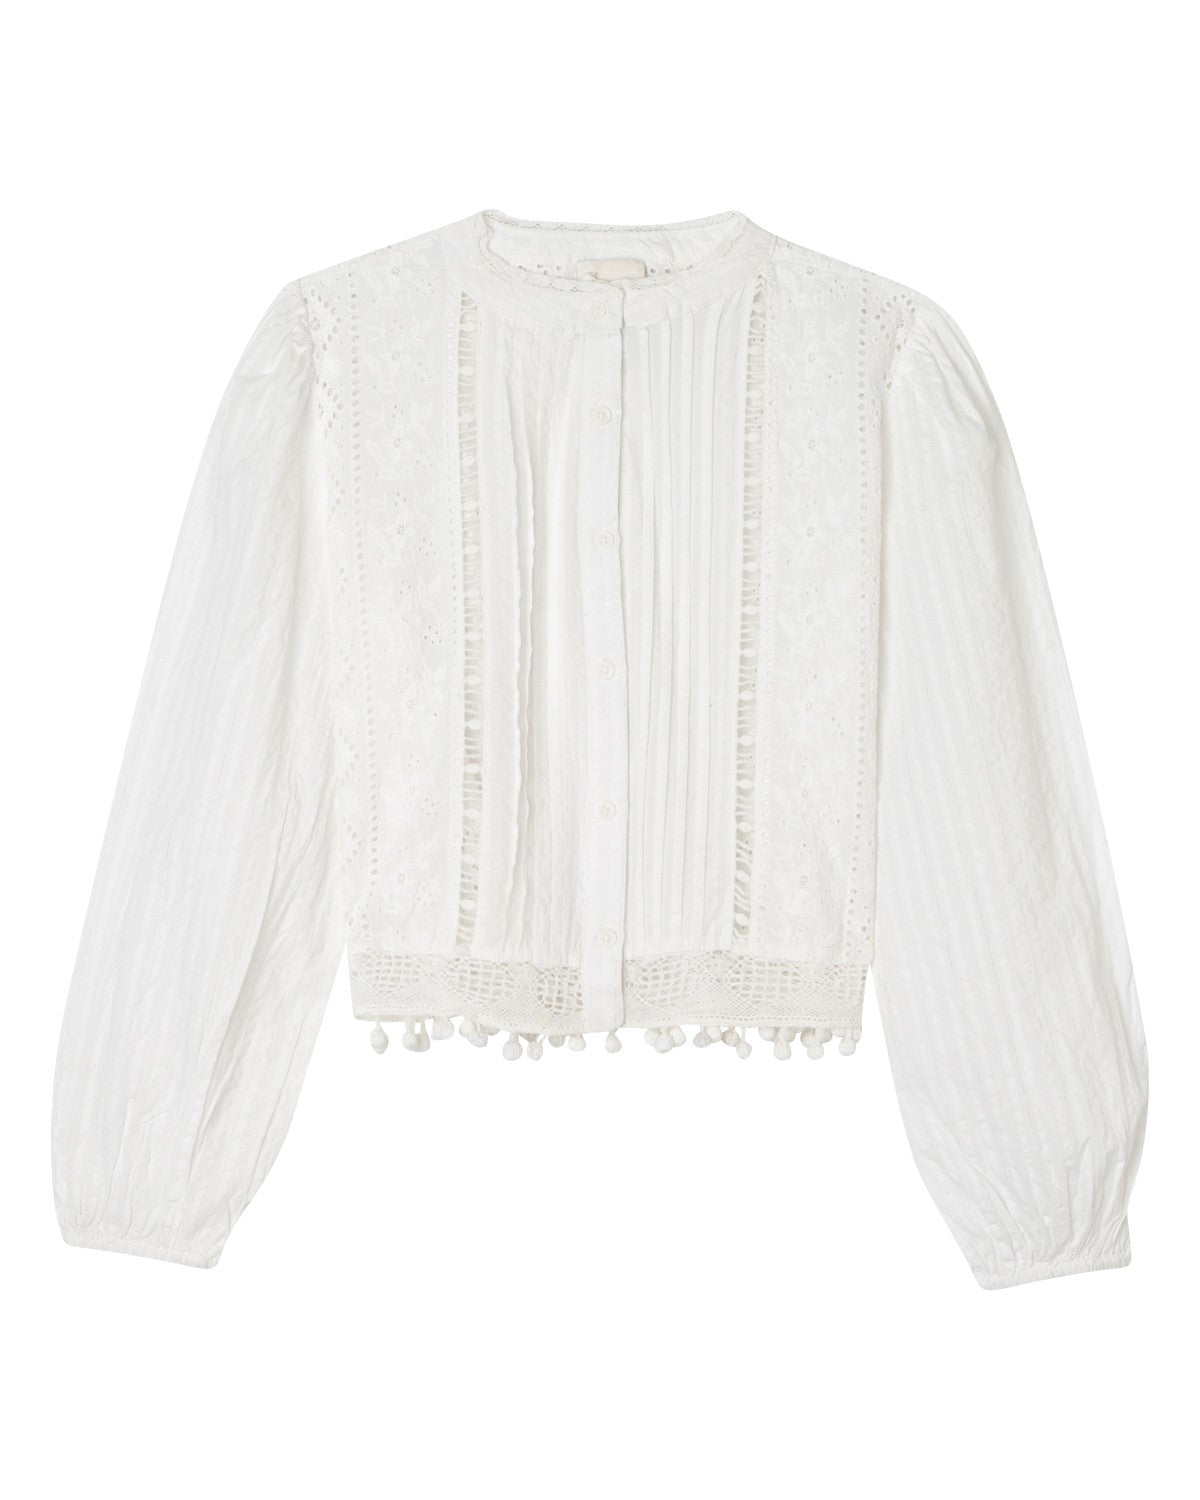 Industry Women's Woven Embroidery Button Front Blouse | JANE + MERCER